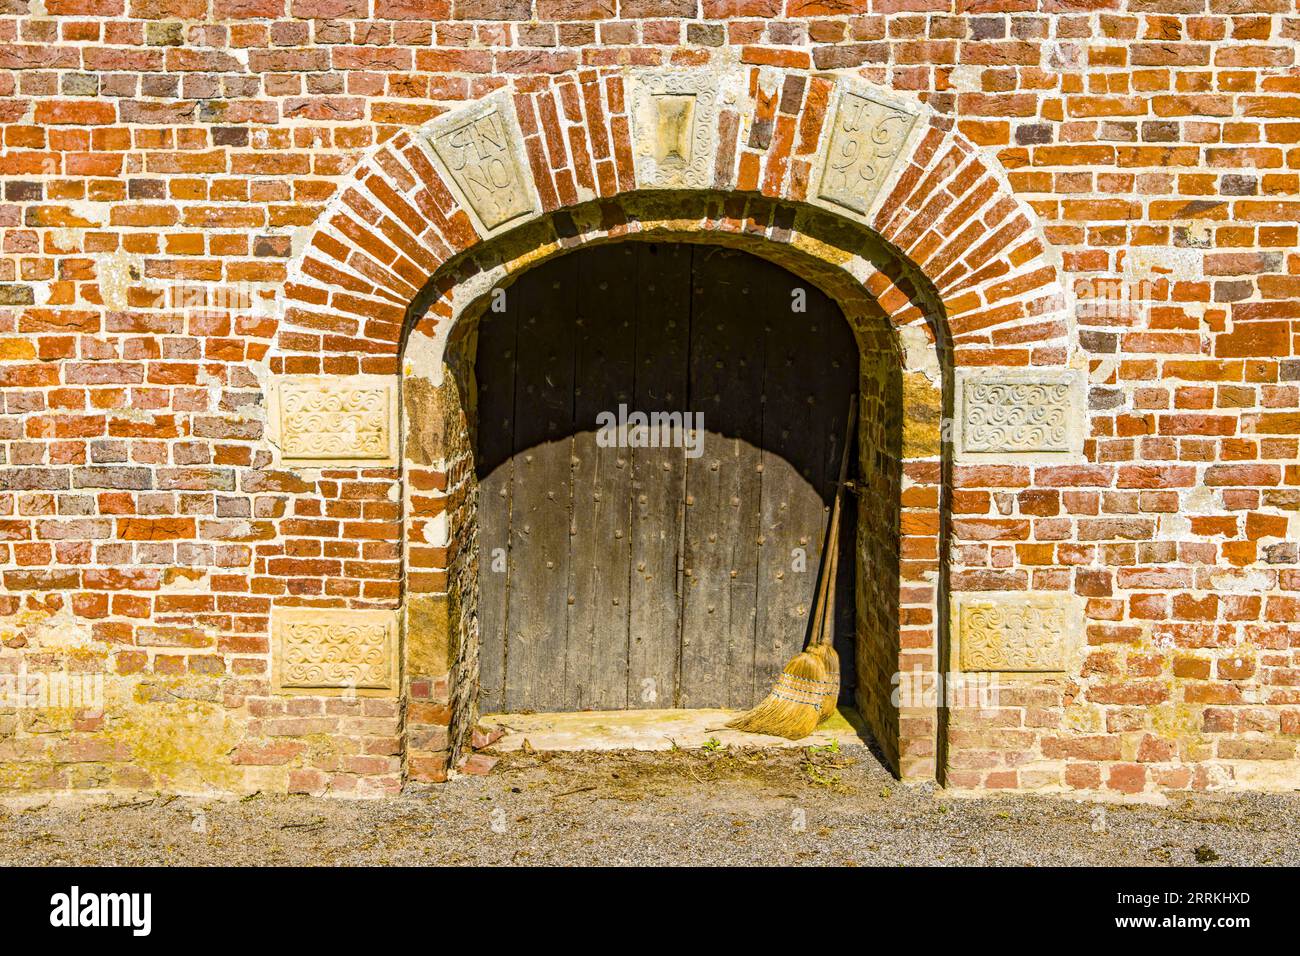 locked entrance to the church with two brooms provided Stock Photo